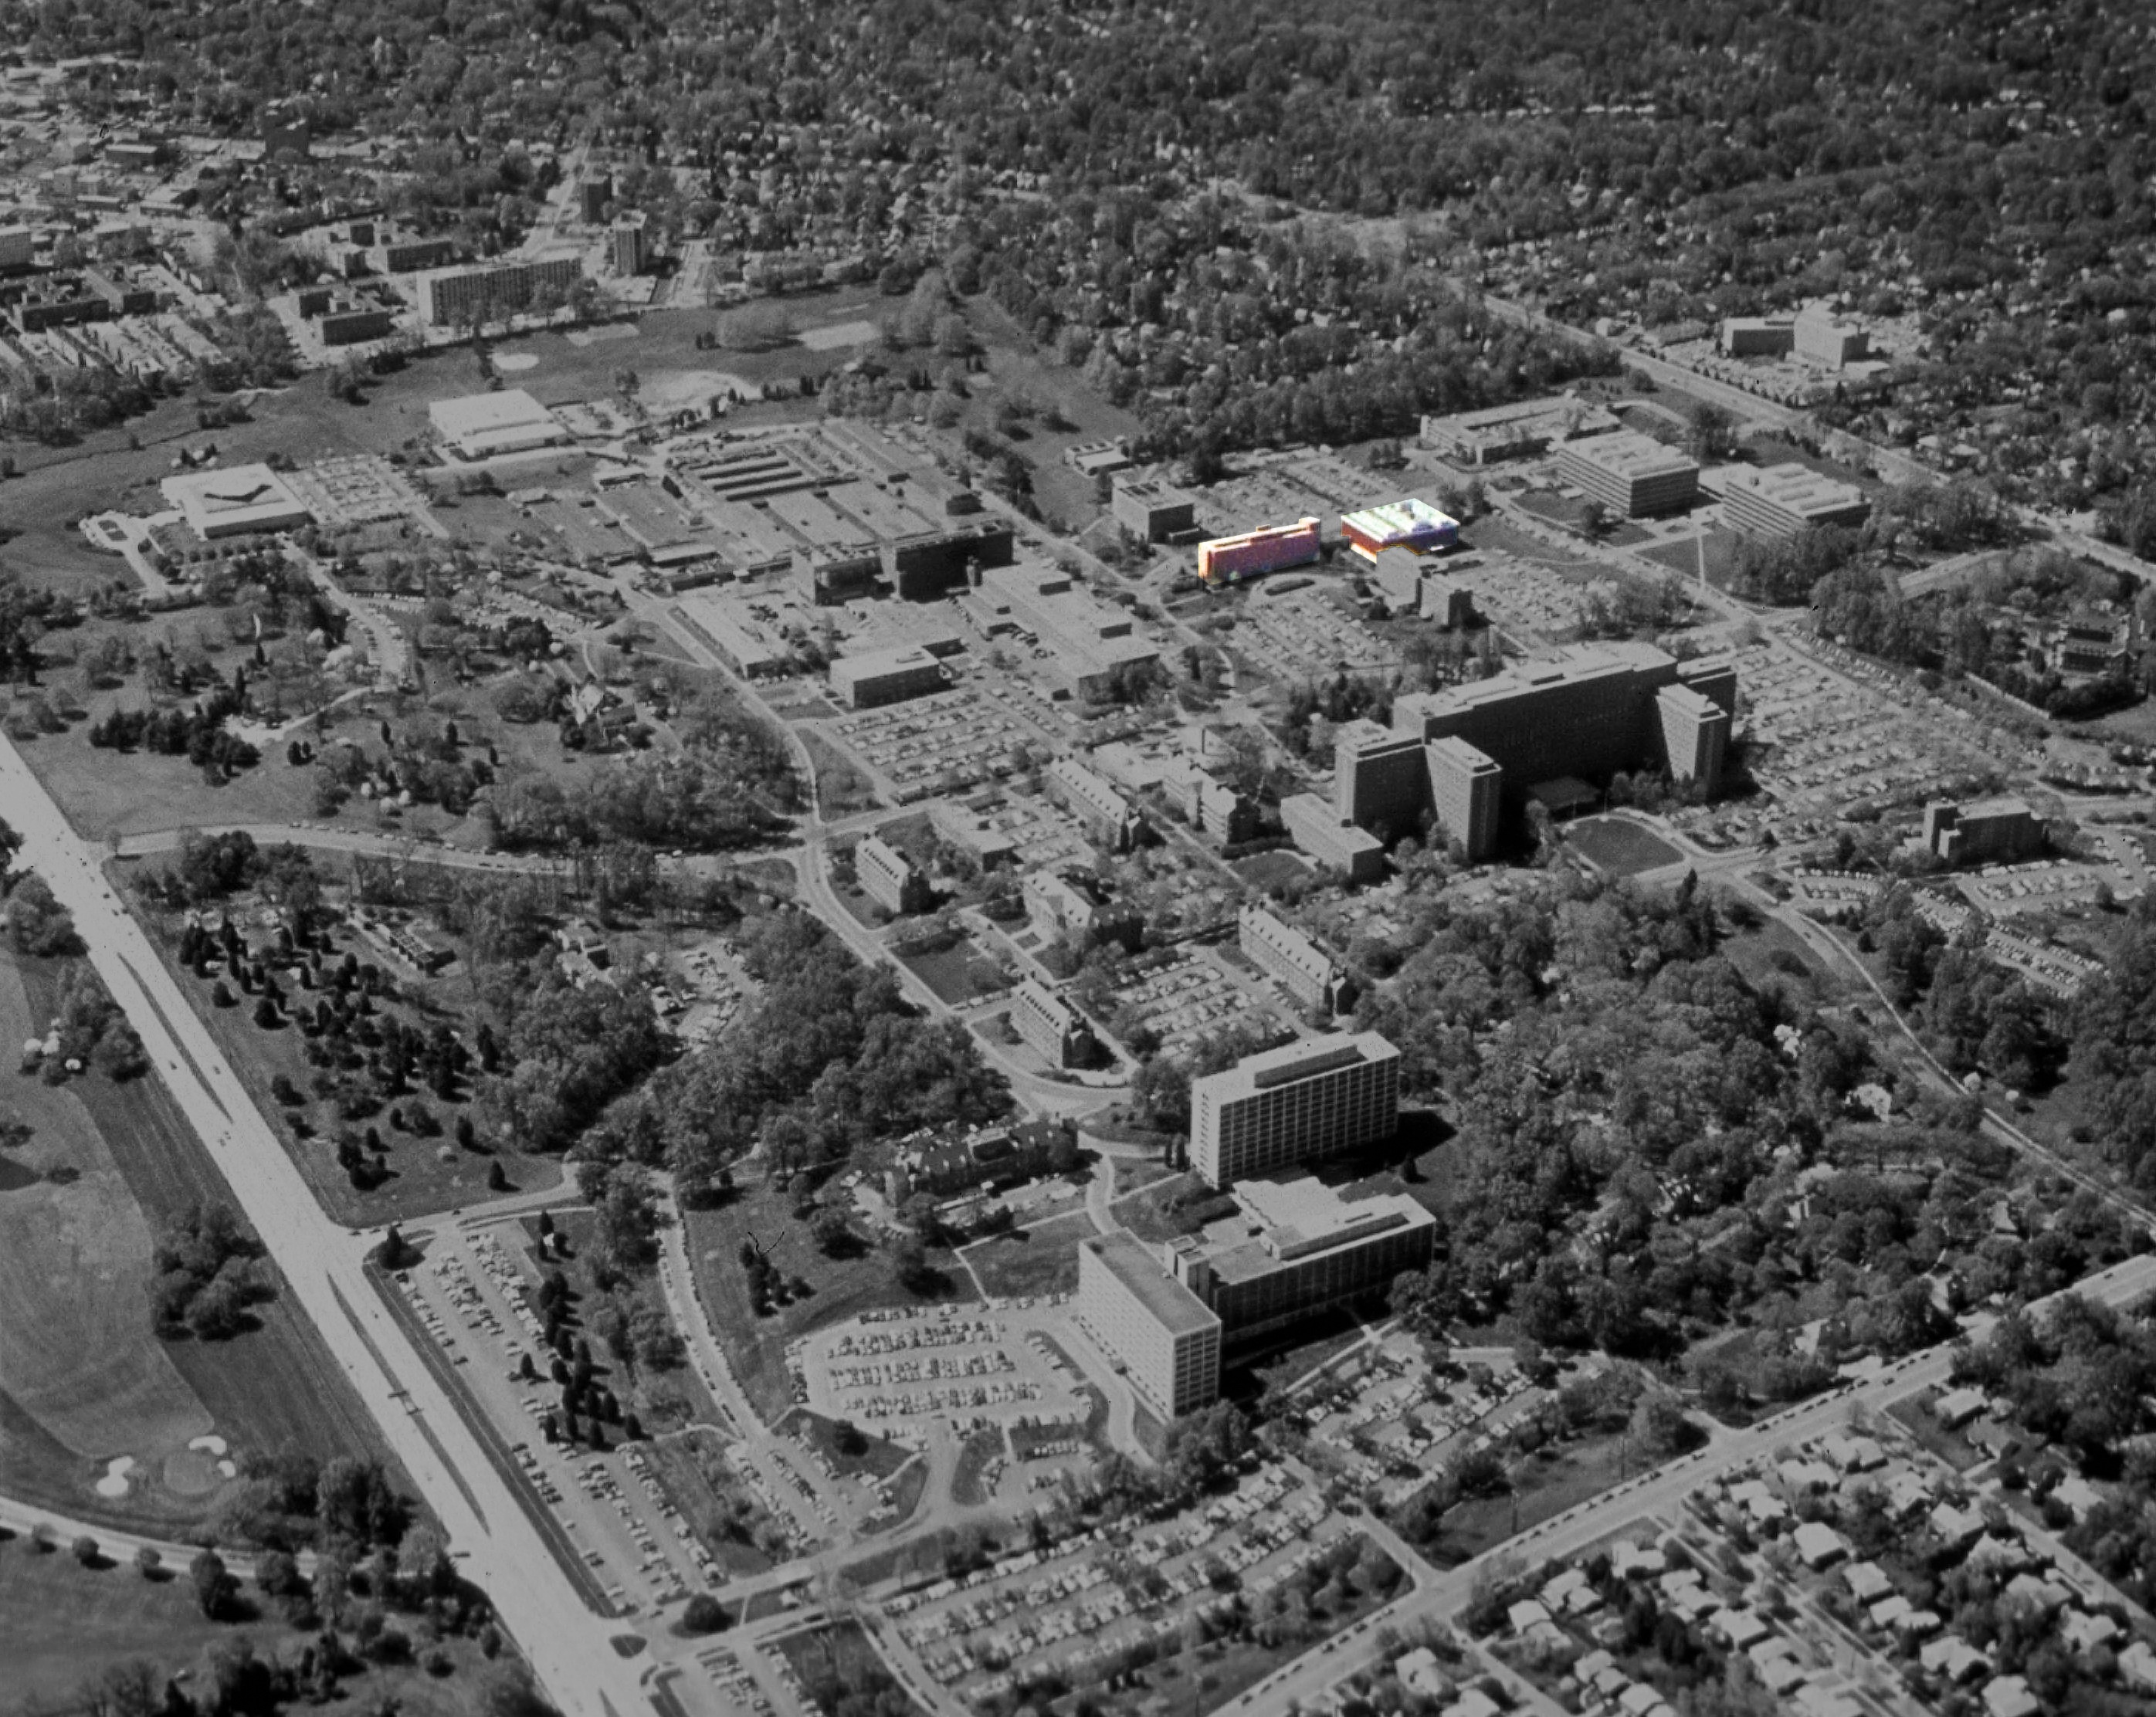 Aerial Image of the NIH campus taken in 1975